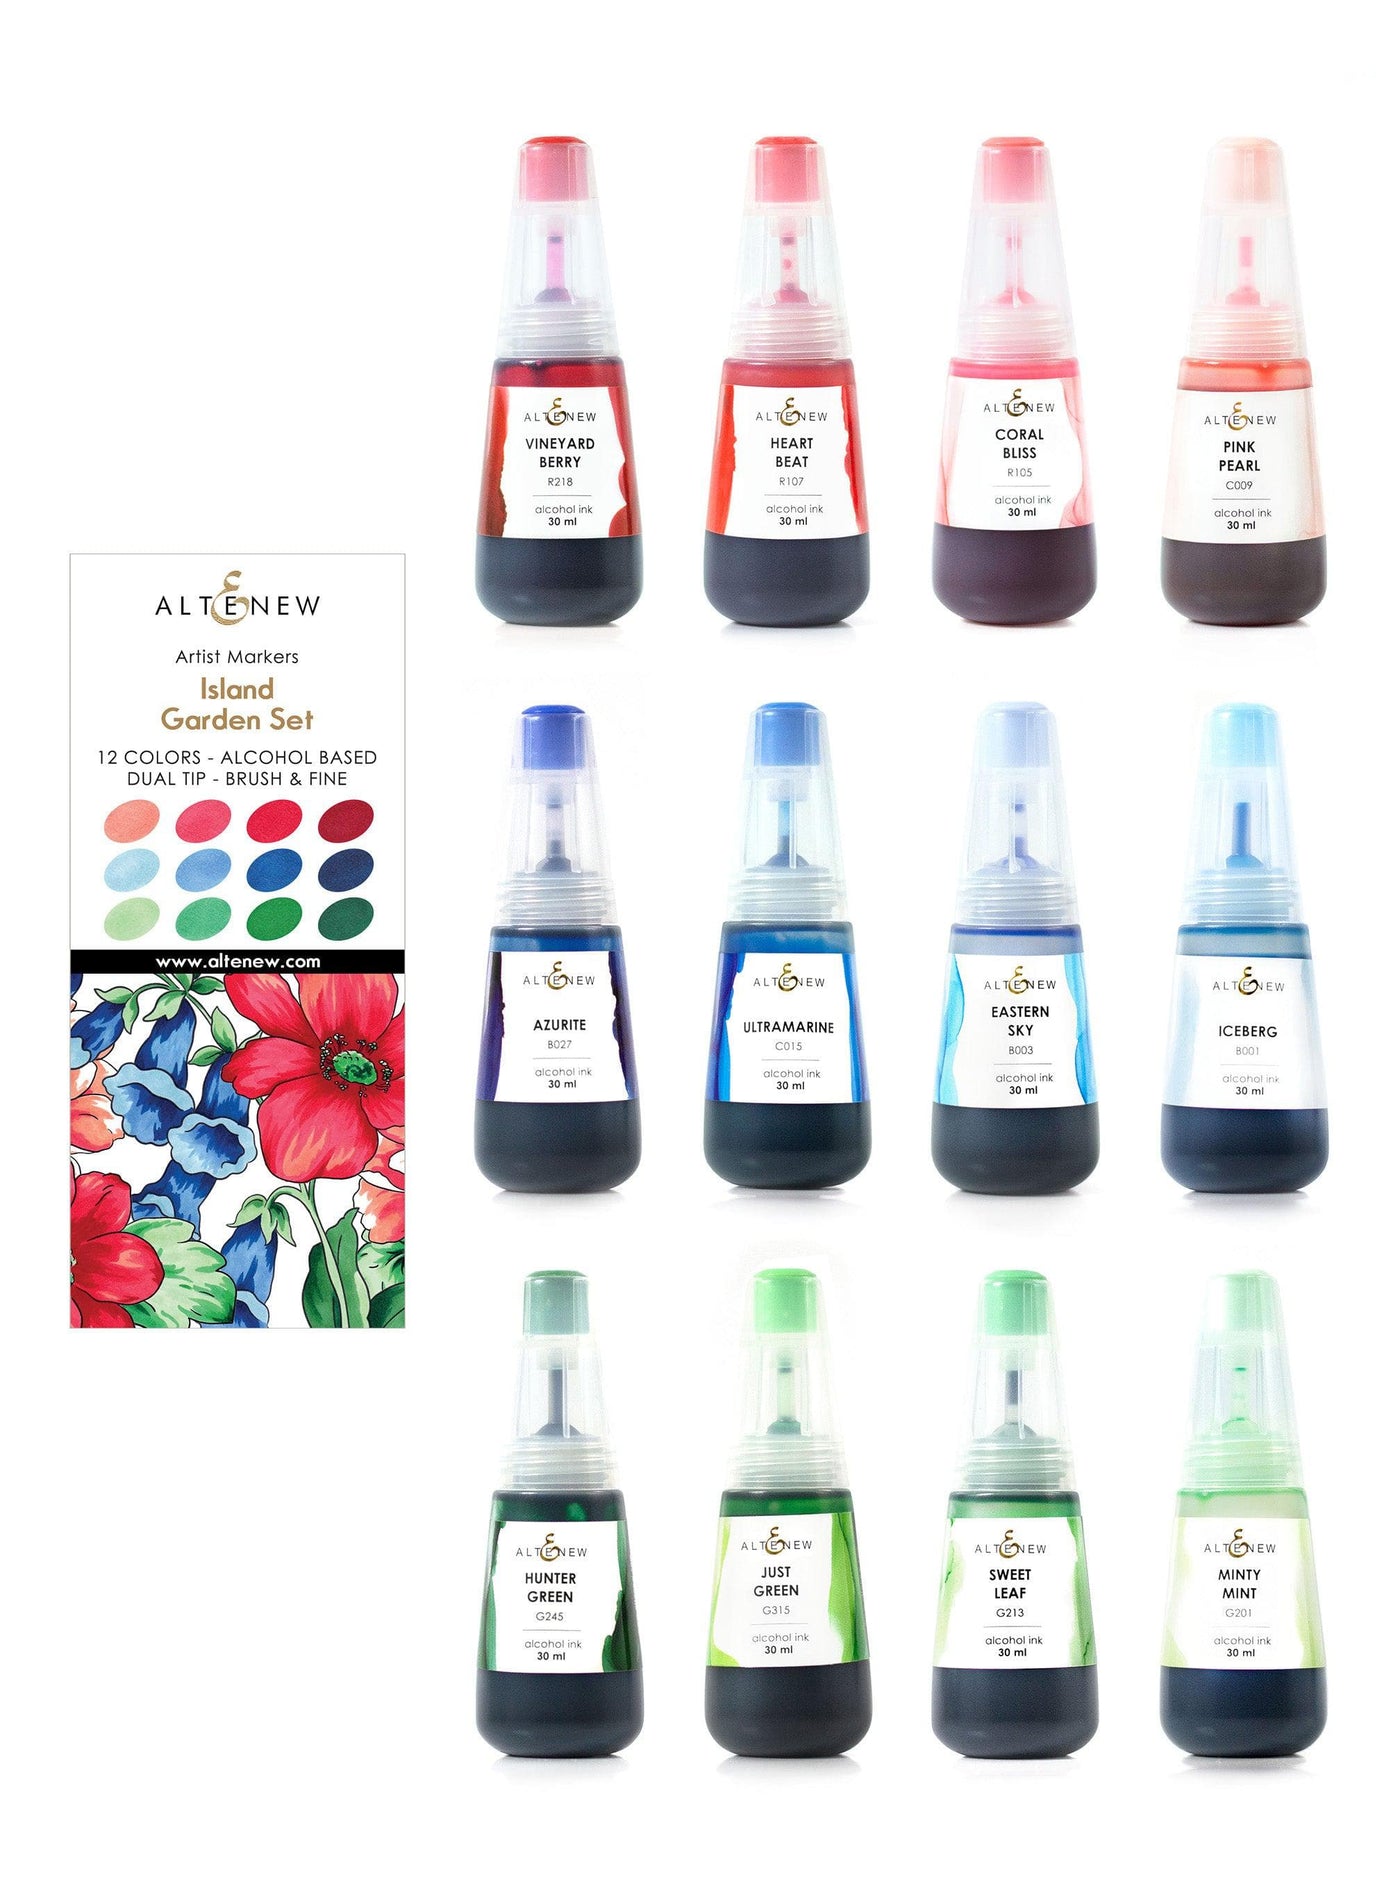 Artist Alcohol Markers Set F & Exotic Blooms Marker Coloring Book Bundle, Altenew